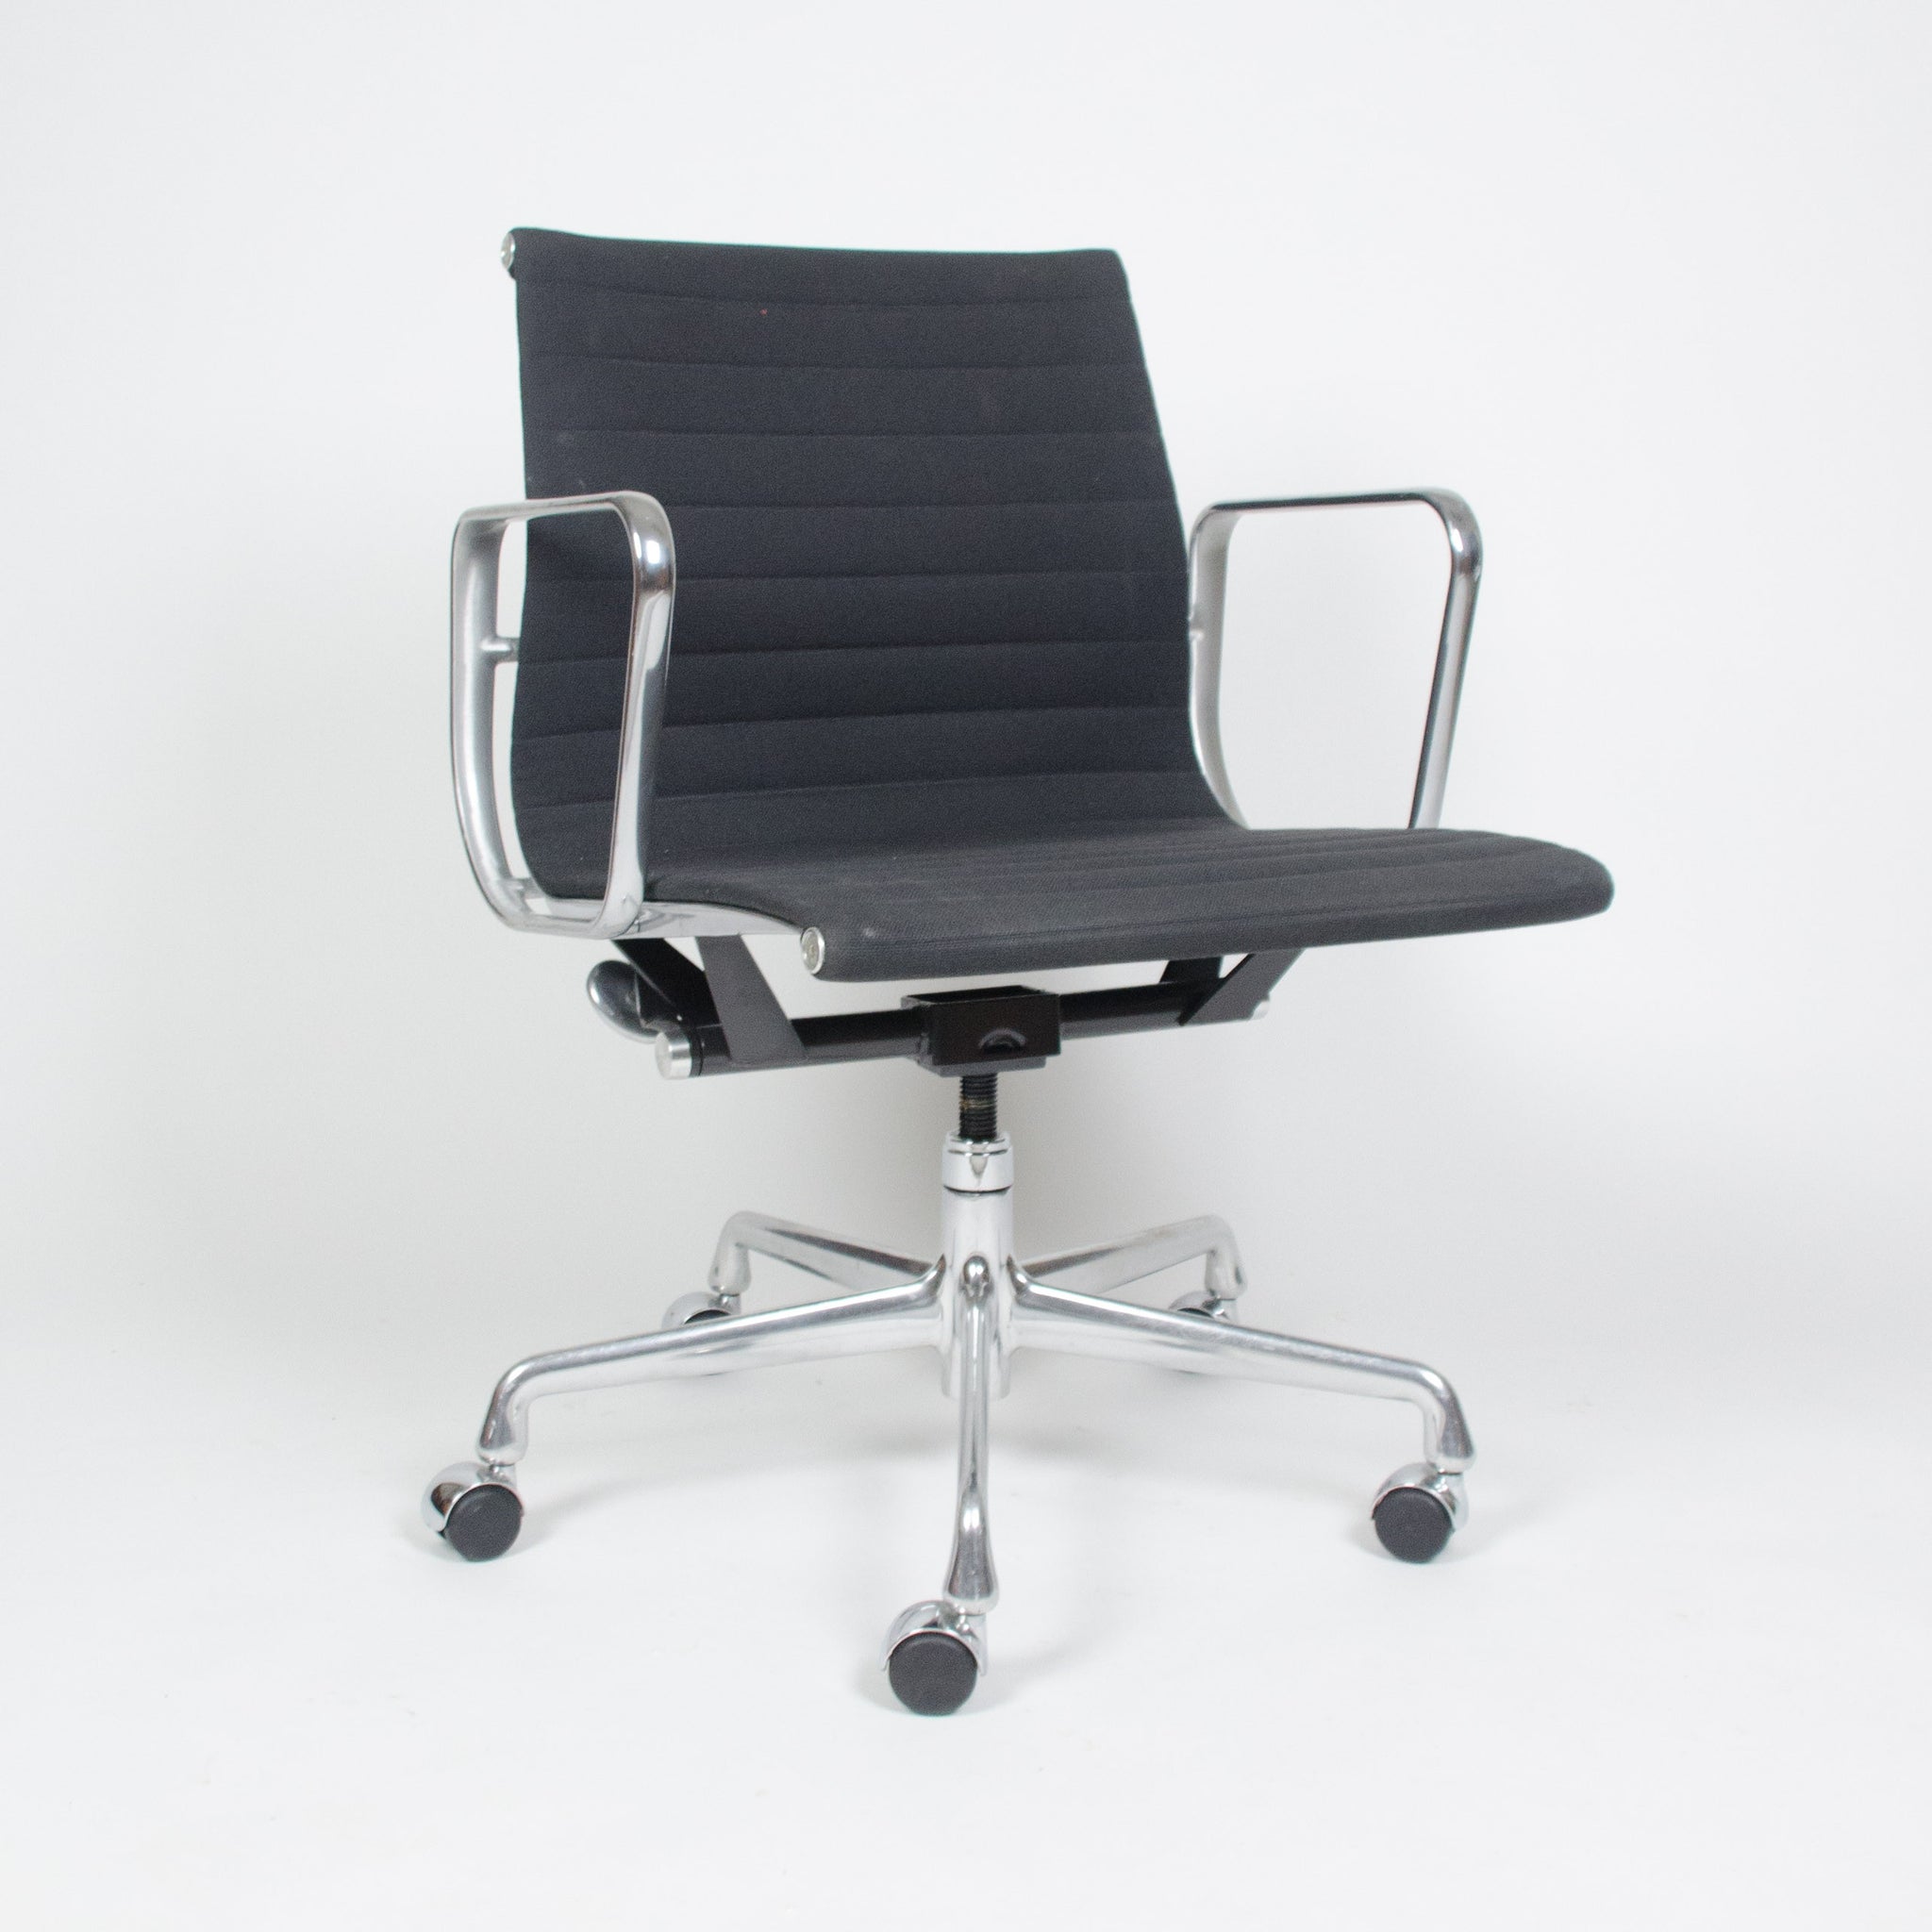 Eames Herman Miller Aluminum Group Executive Desk Chairs Black Fabric 16 Available